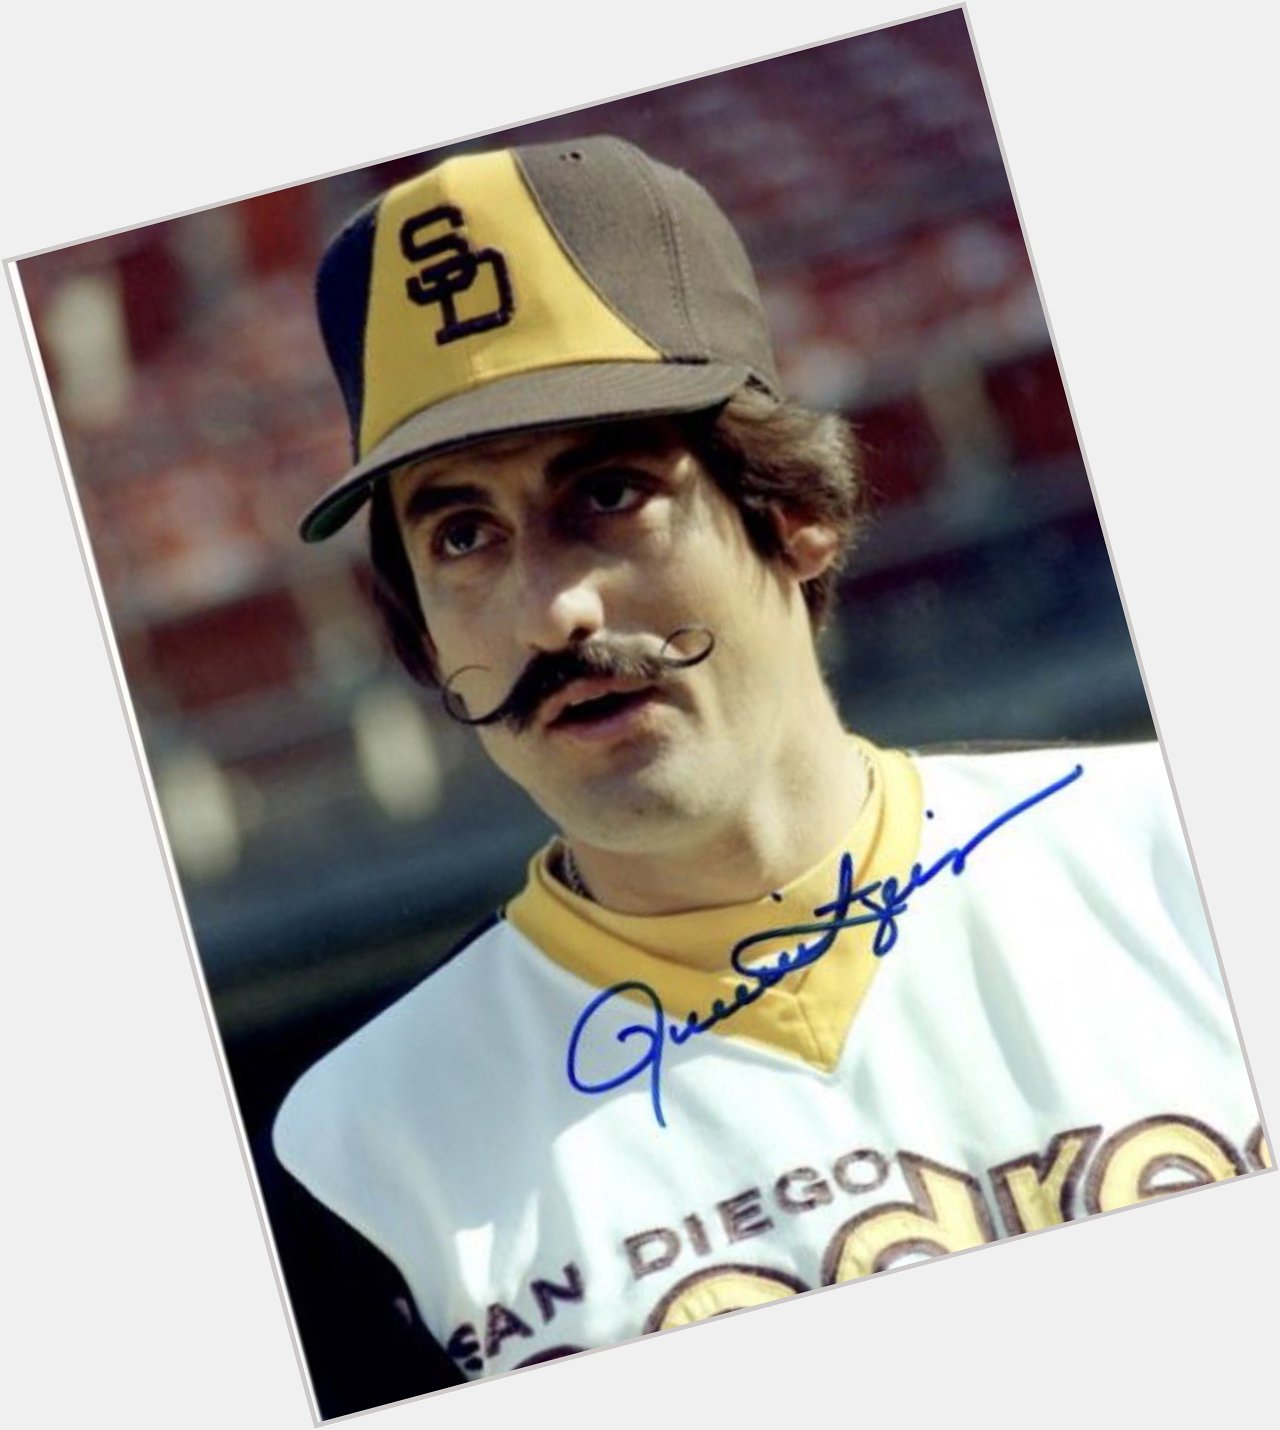 A Happy Birthday to former Pitcher and Hall of Famer Rollie Fingers 